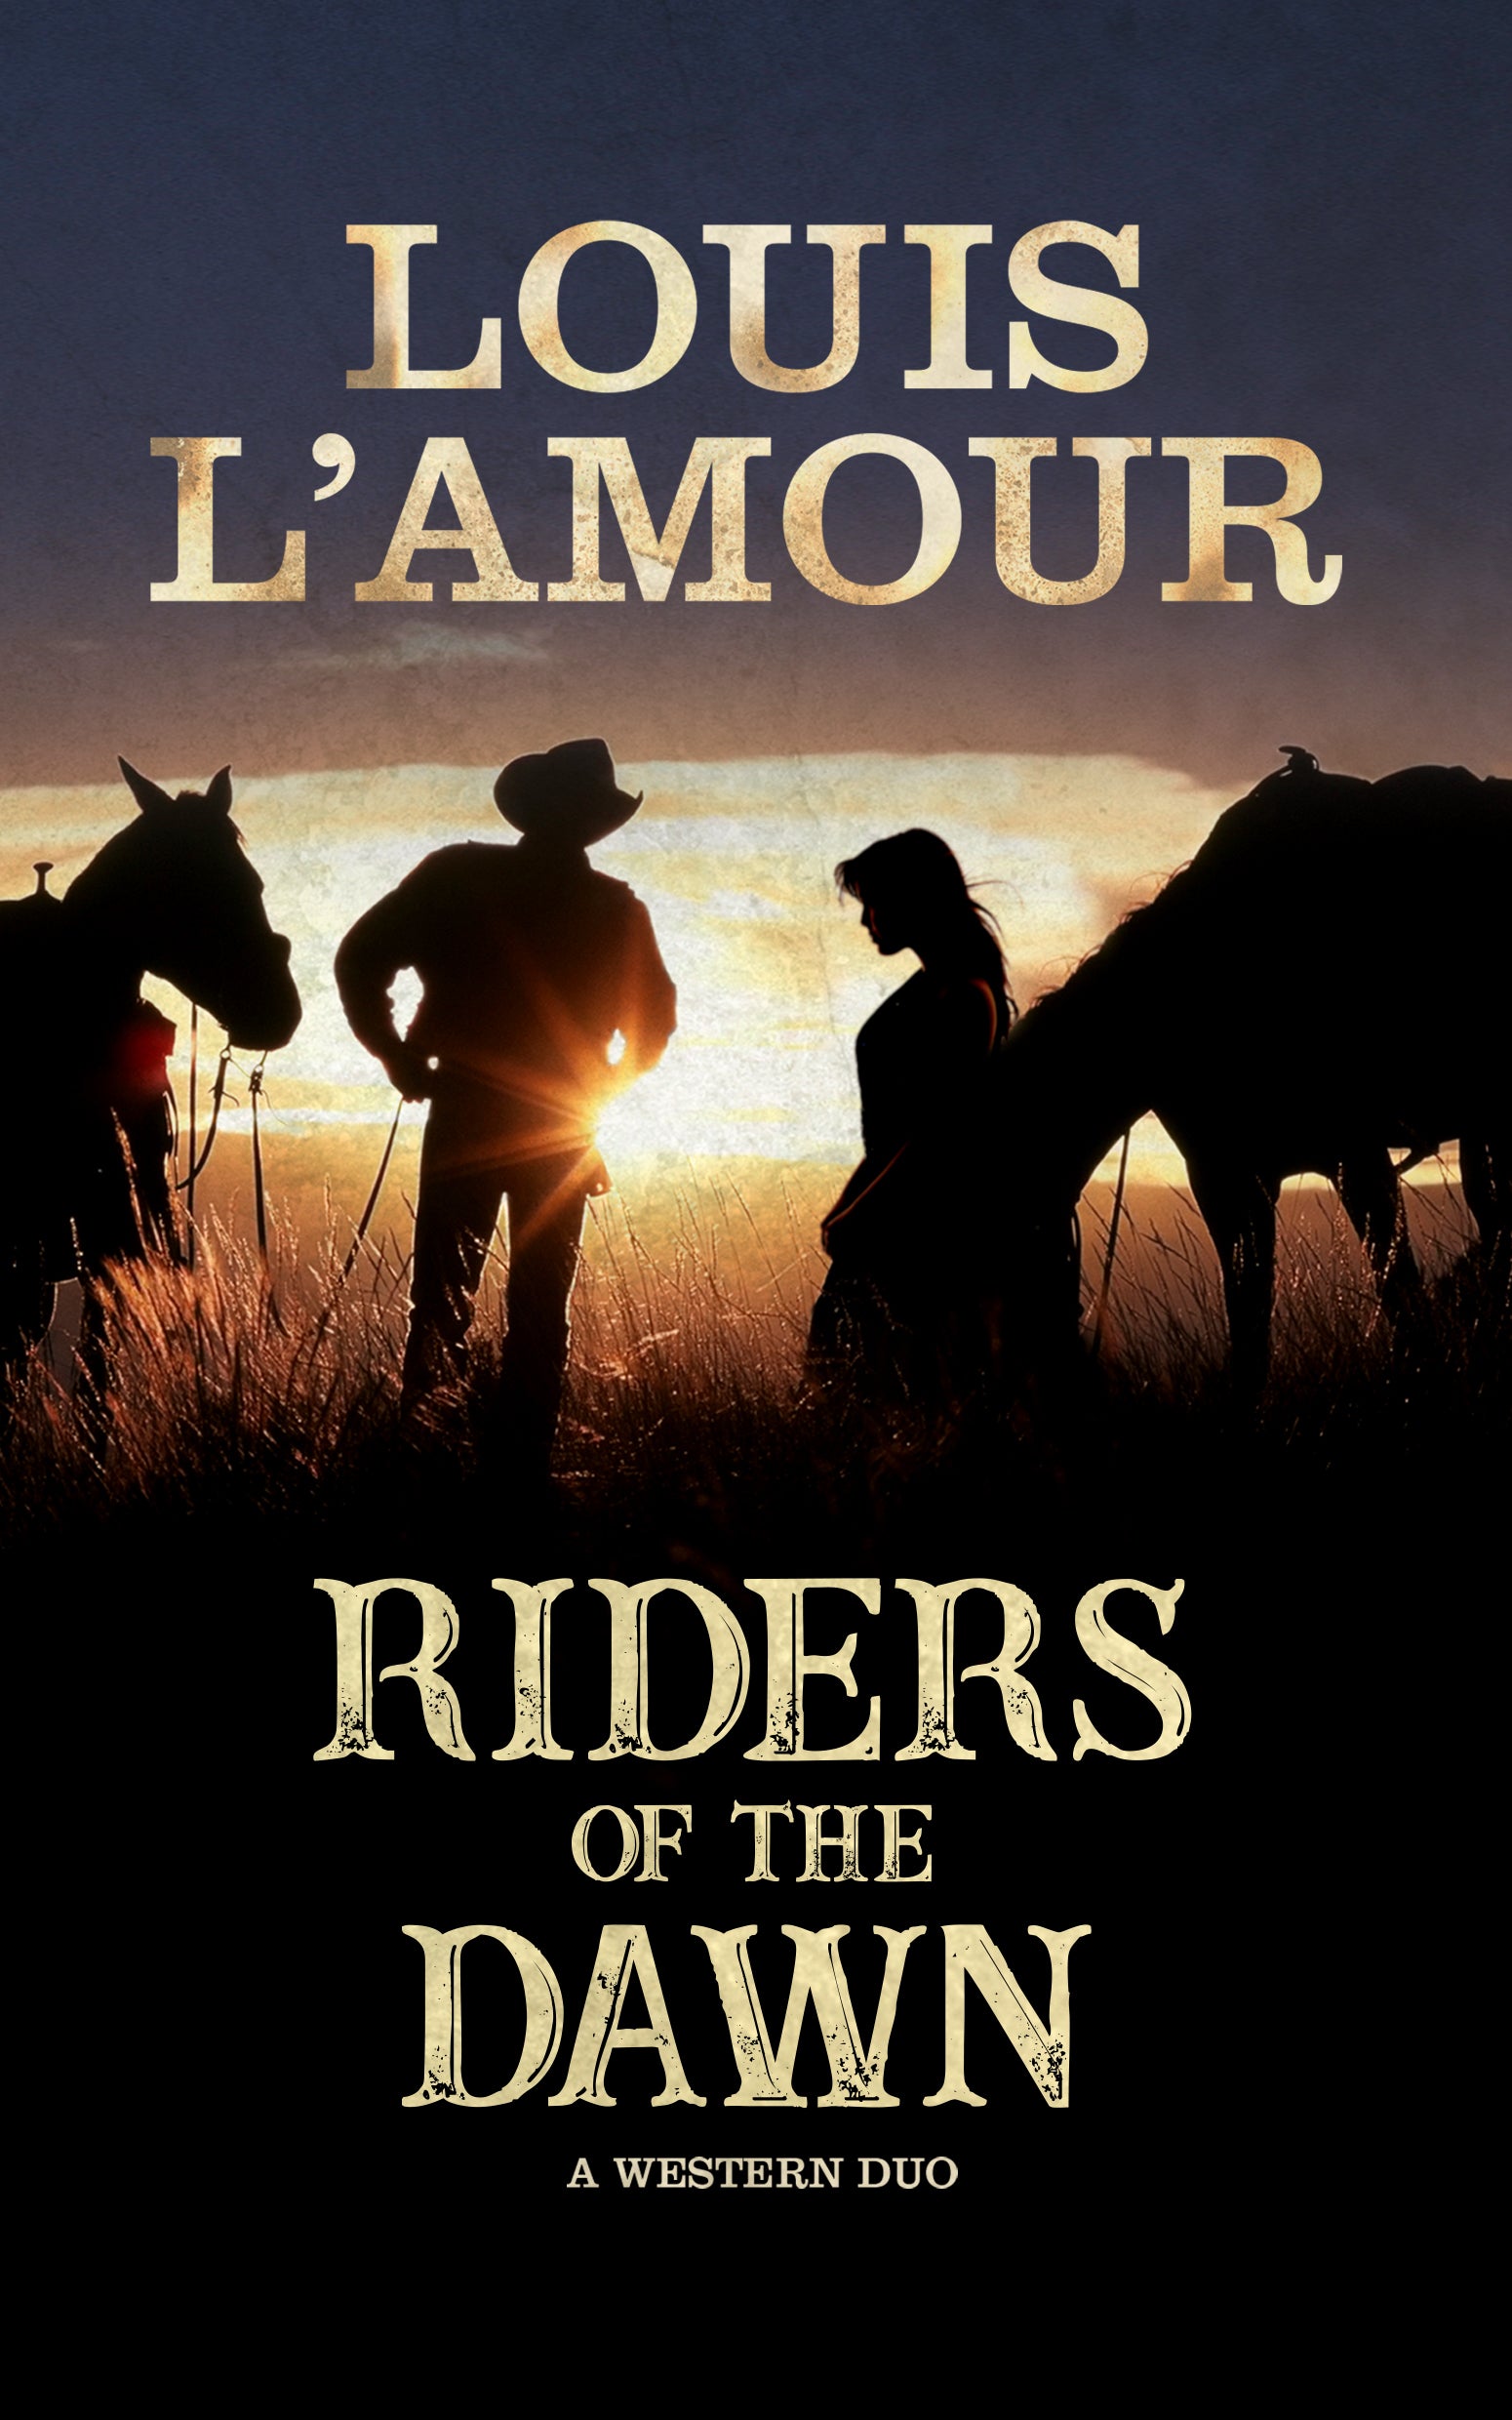 Riders of the Dawn